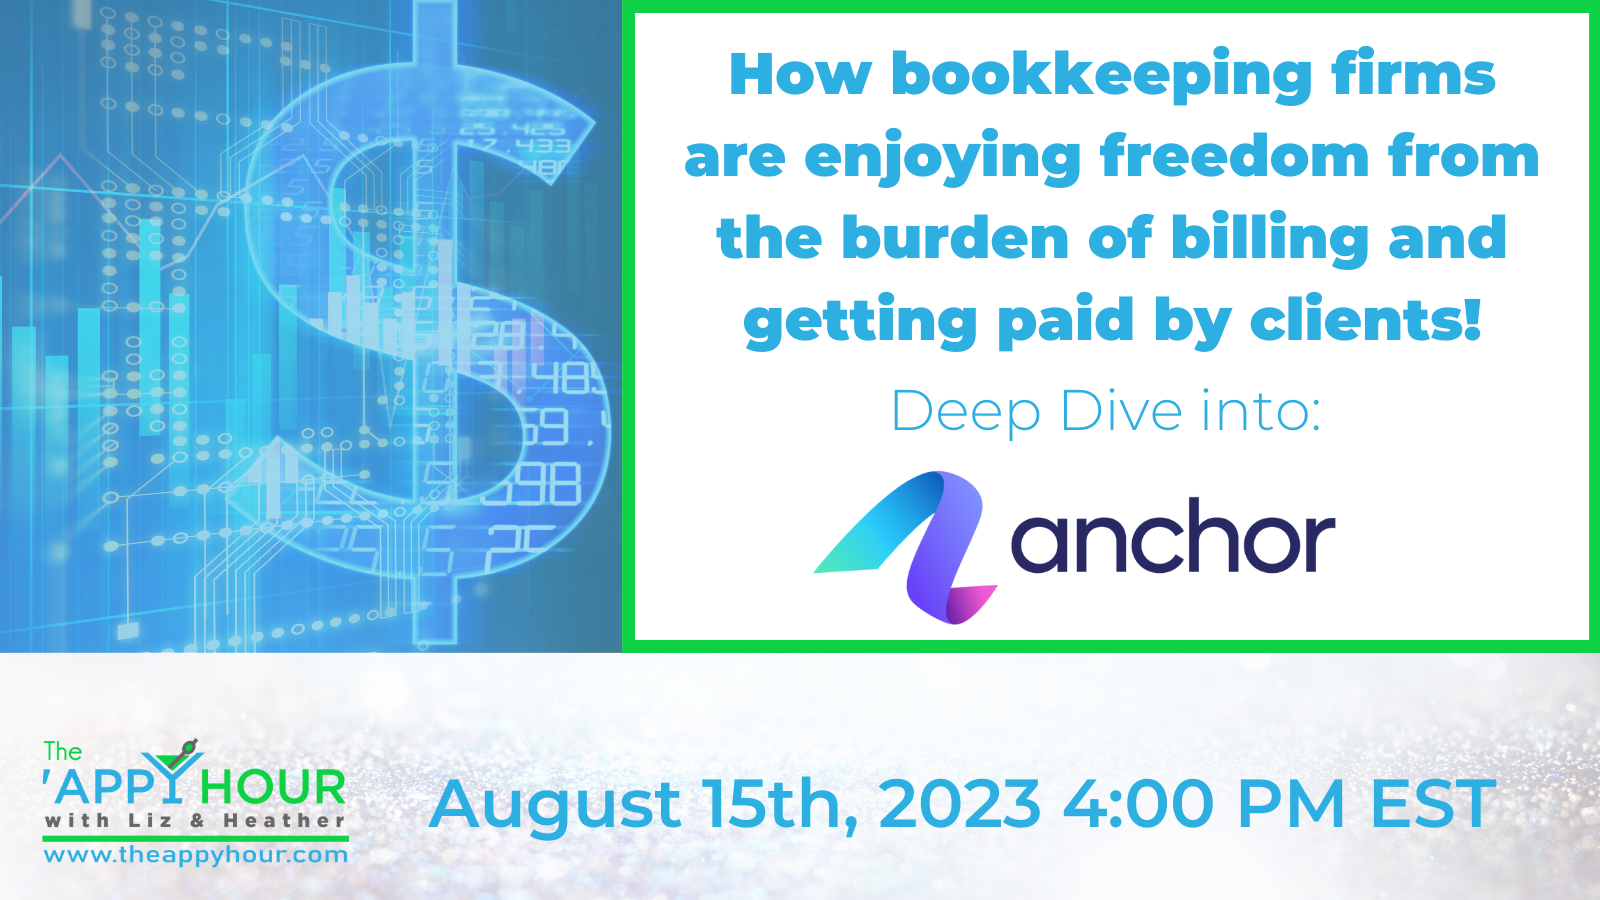 How bookkeeping firms are enjoying freedom from the burden of billing and getting paid by clients!